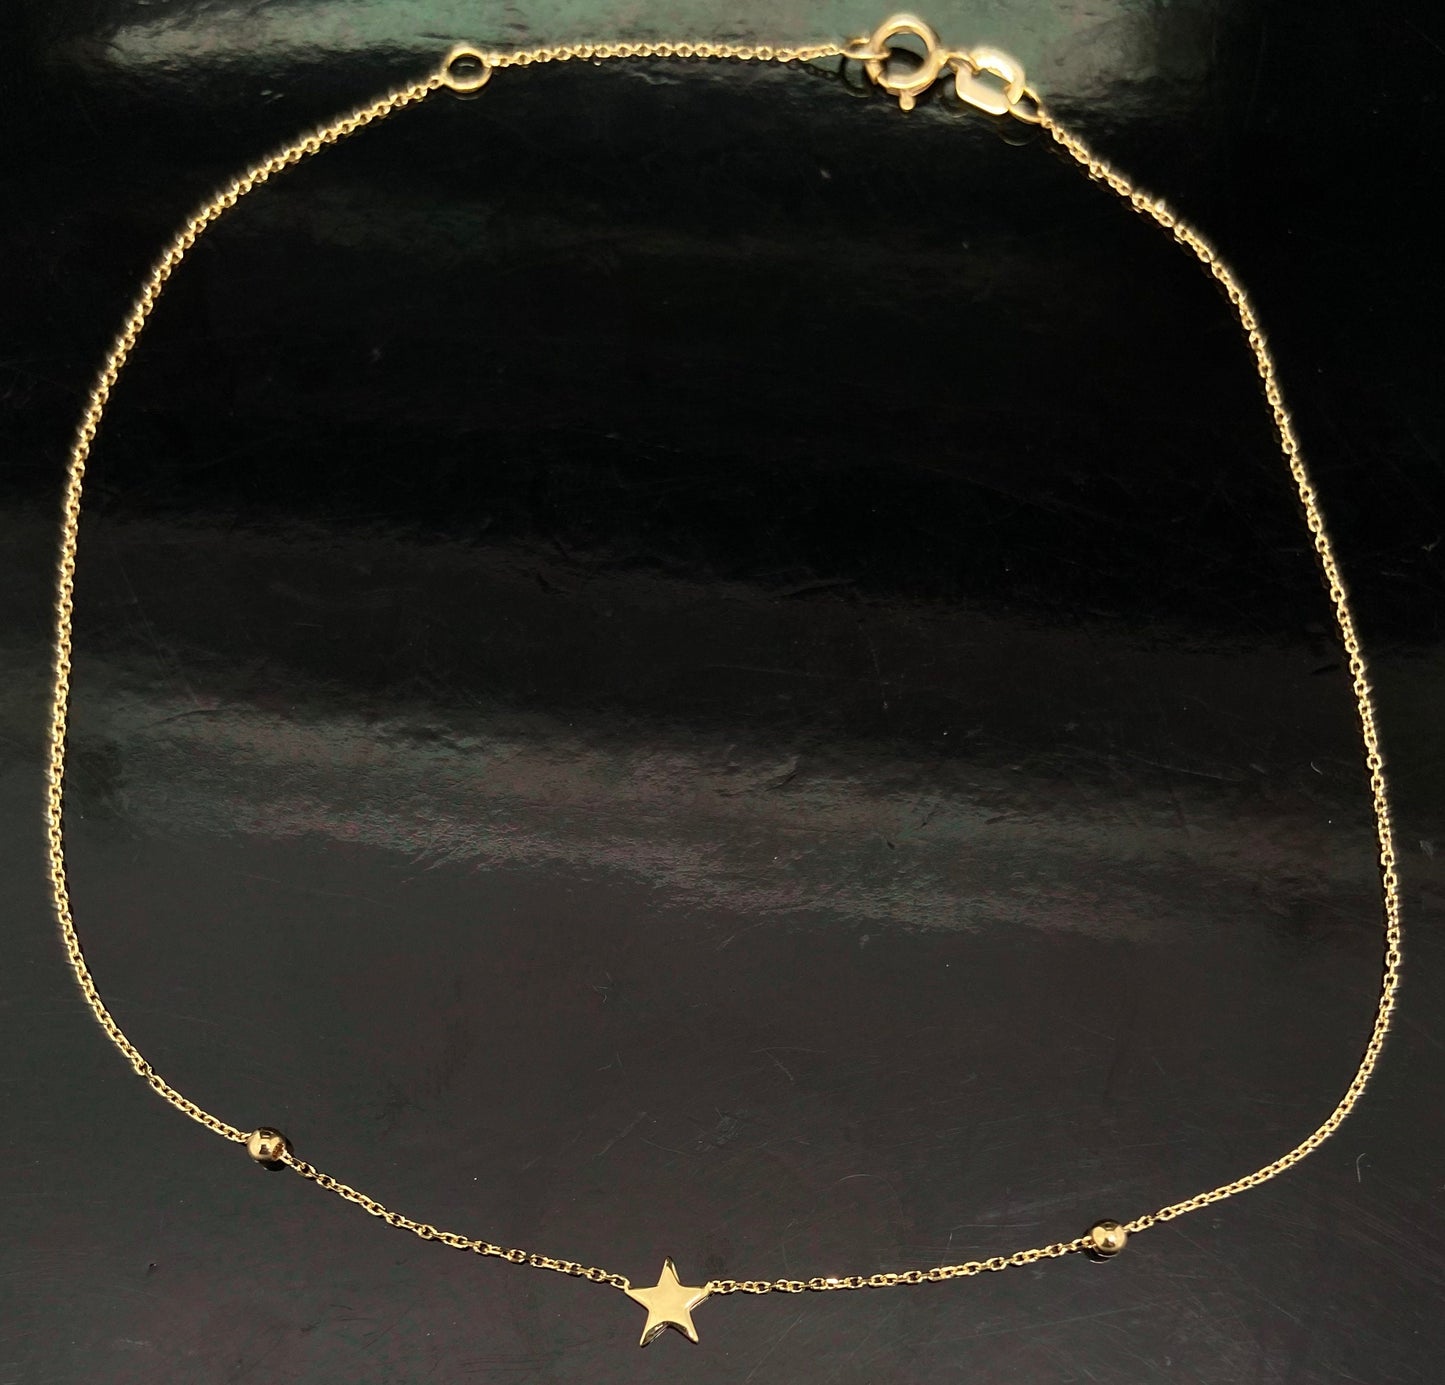 Yellow Gold Mini Star Station Rolo Link Adjustable Chain Anklet Bracelet